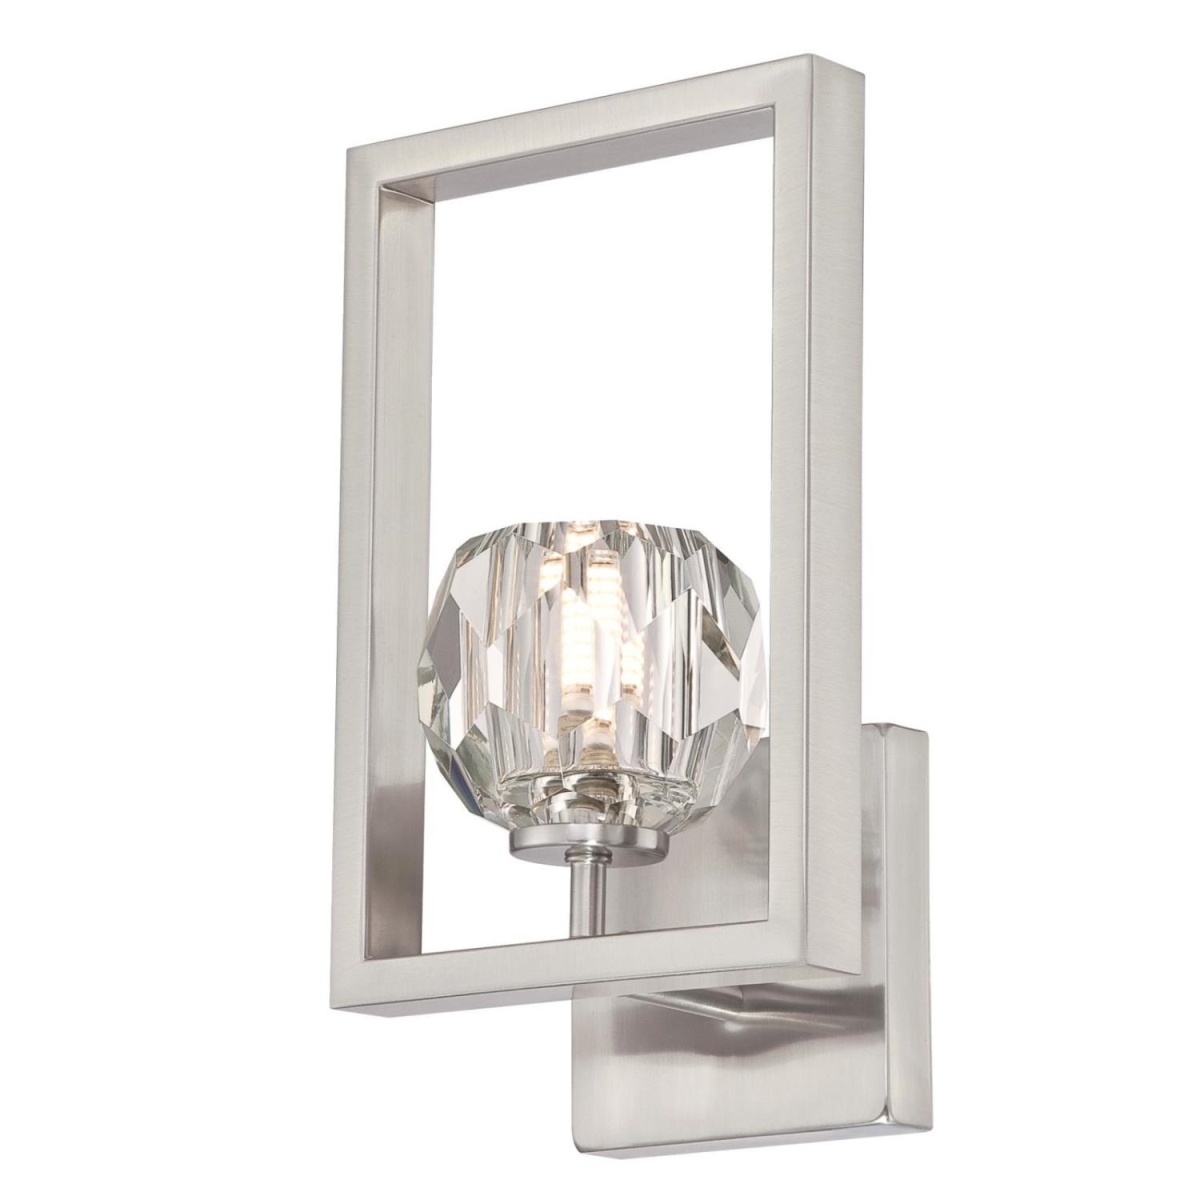 Picture of Westinghouse Lighting 6367500 1 Light LED Wall Fixture with Crystal Glass - Brushed Nickel